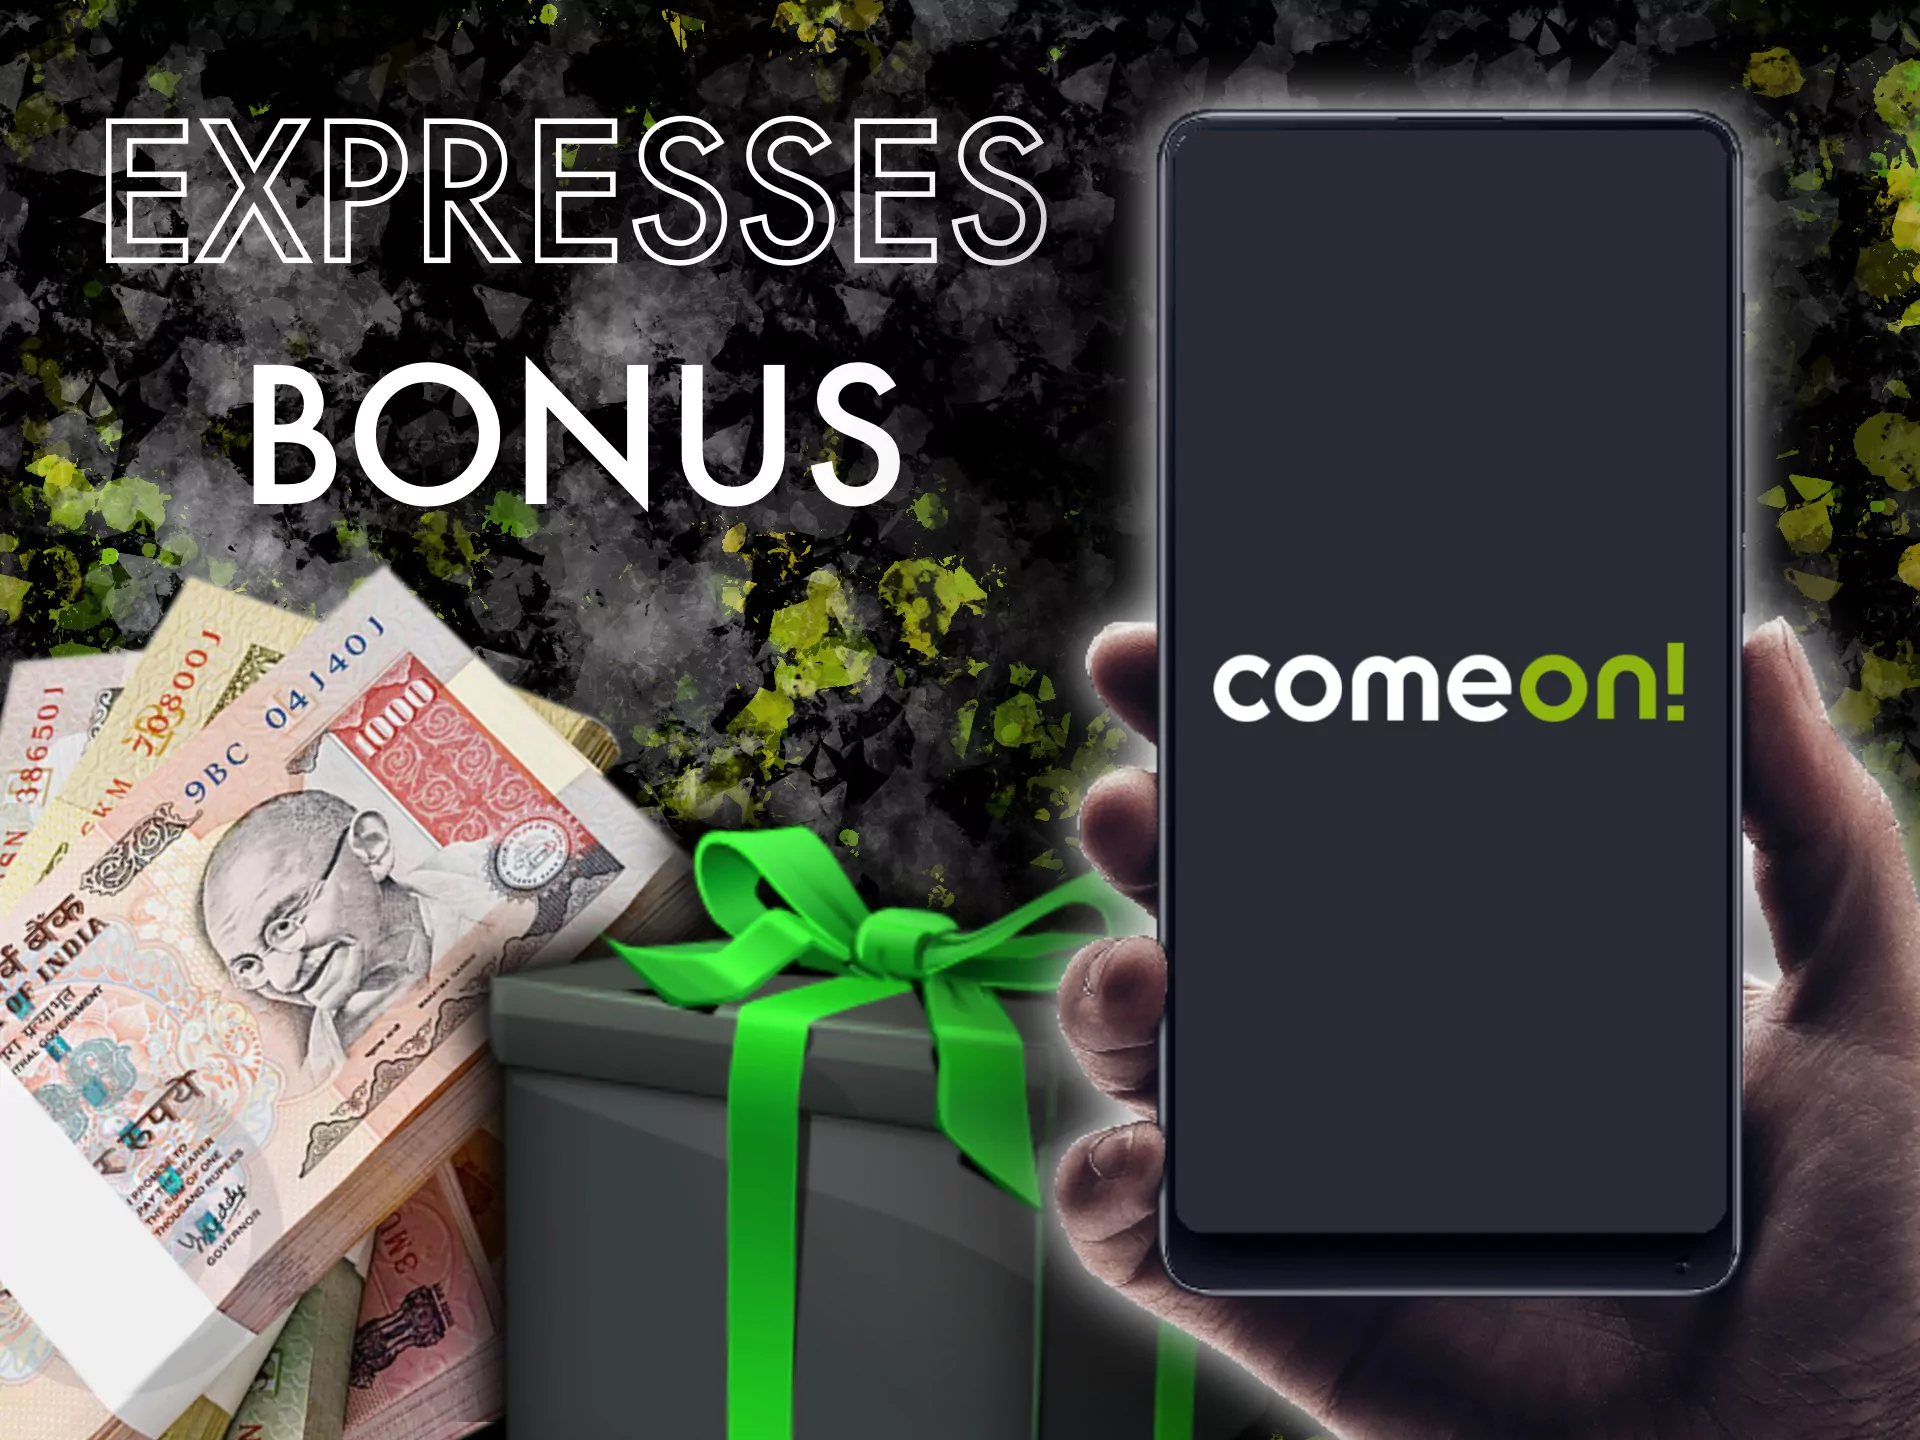 The expresses bonus is one of the sorts of bonuses on Comeon.